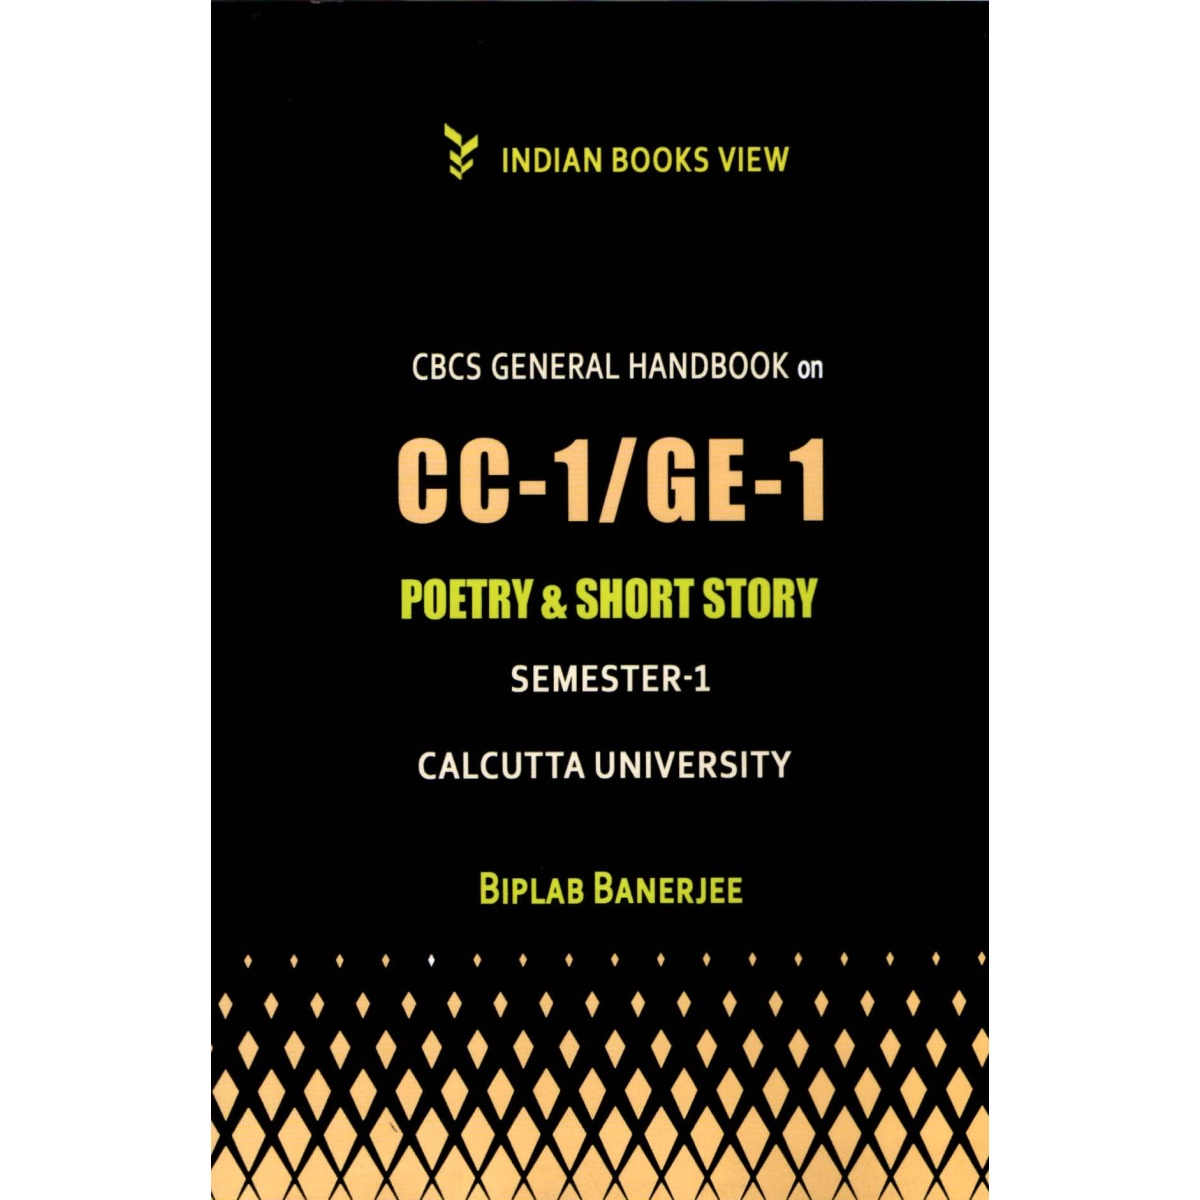 CC-1 GE-1 CBCS General Hand Book on Poetry & Short Story Semester 1 Calcutta University